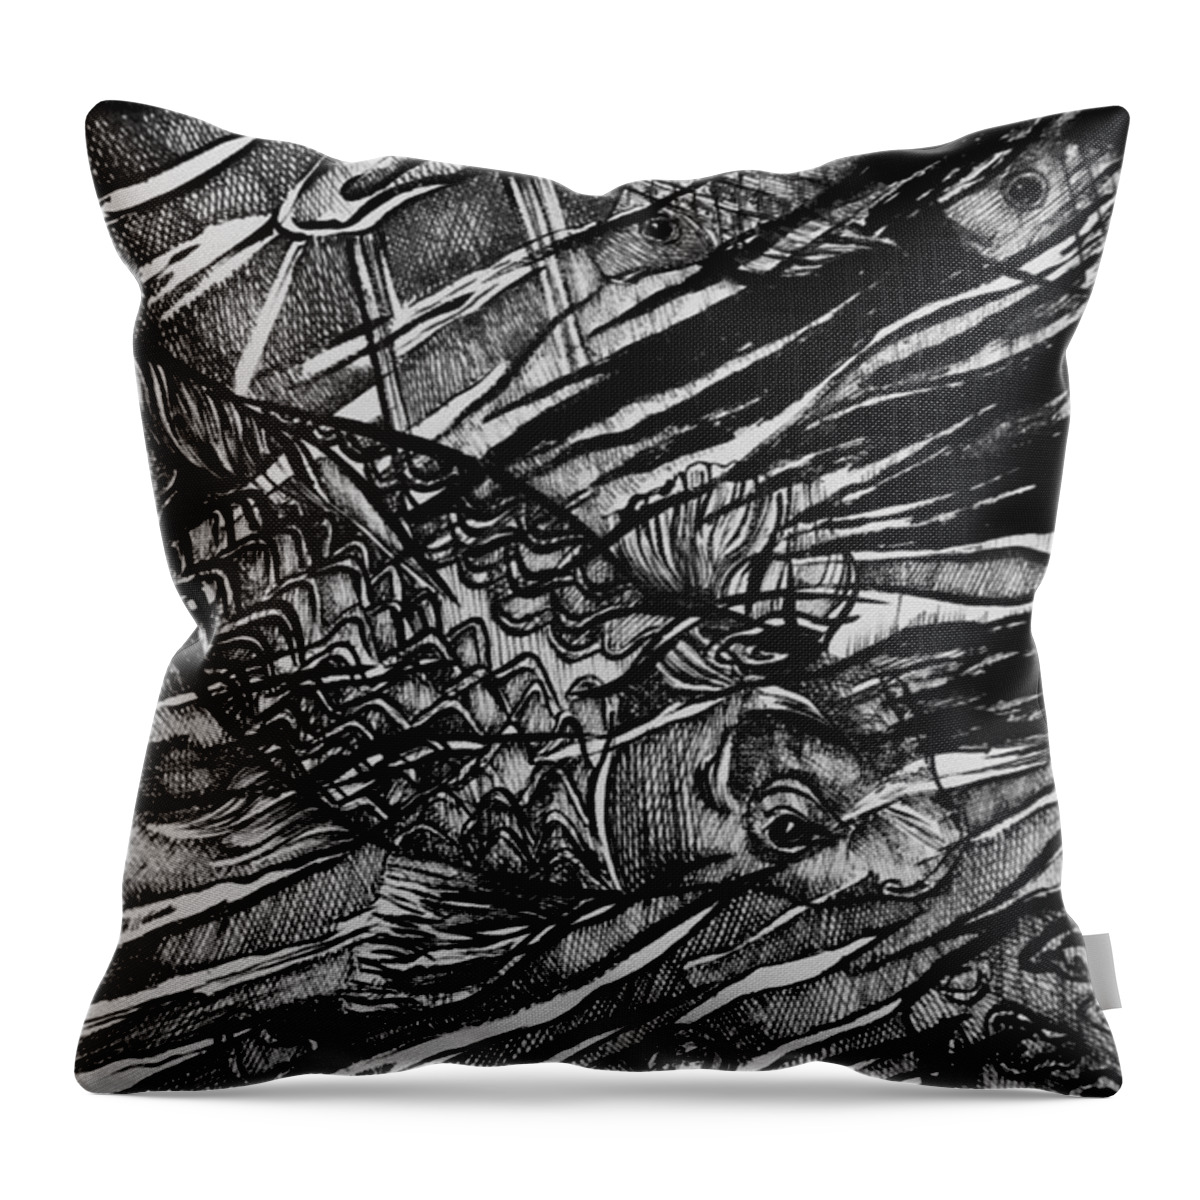 Koi Throw Pillow featuring the drawing Koi Movements by Angela Weddle